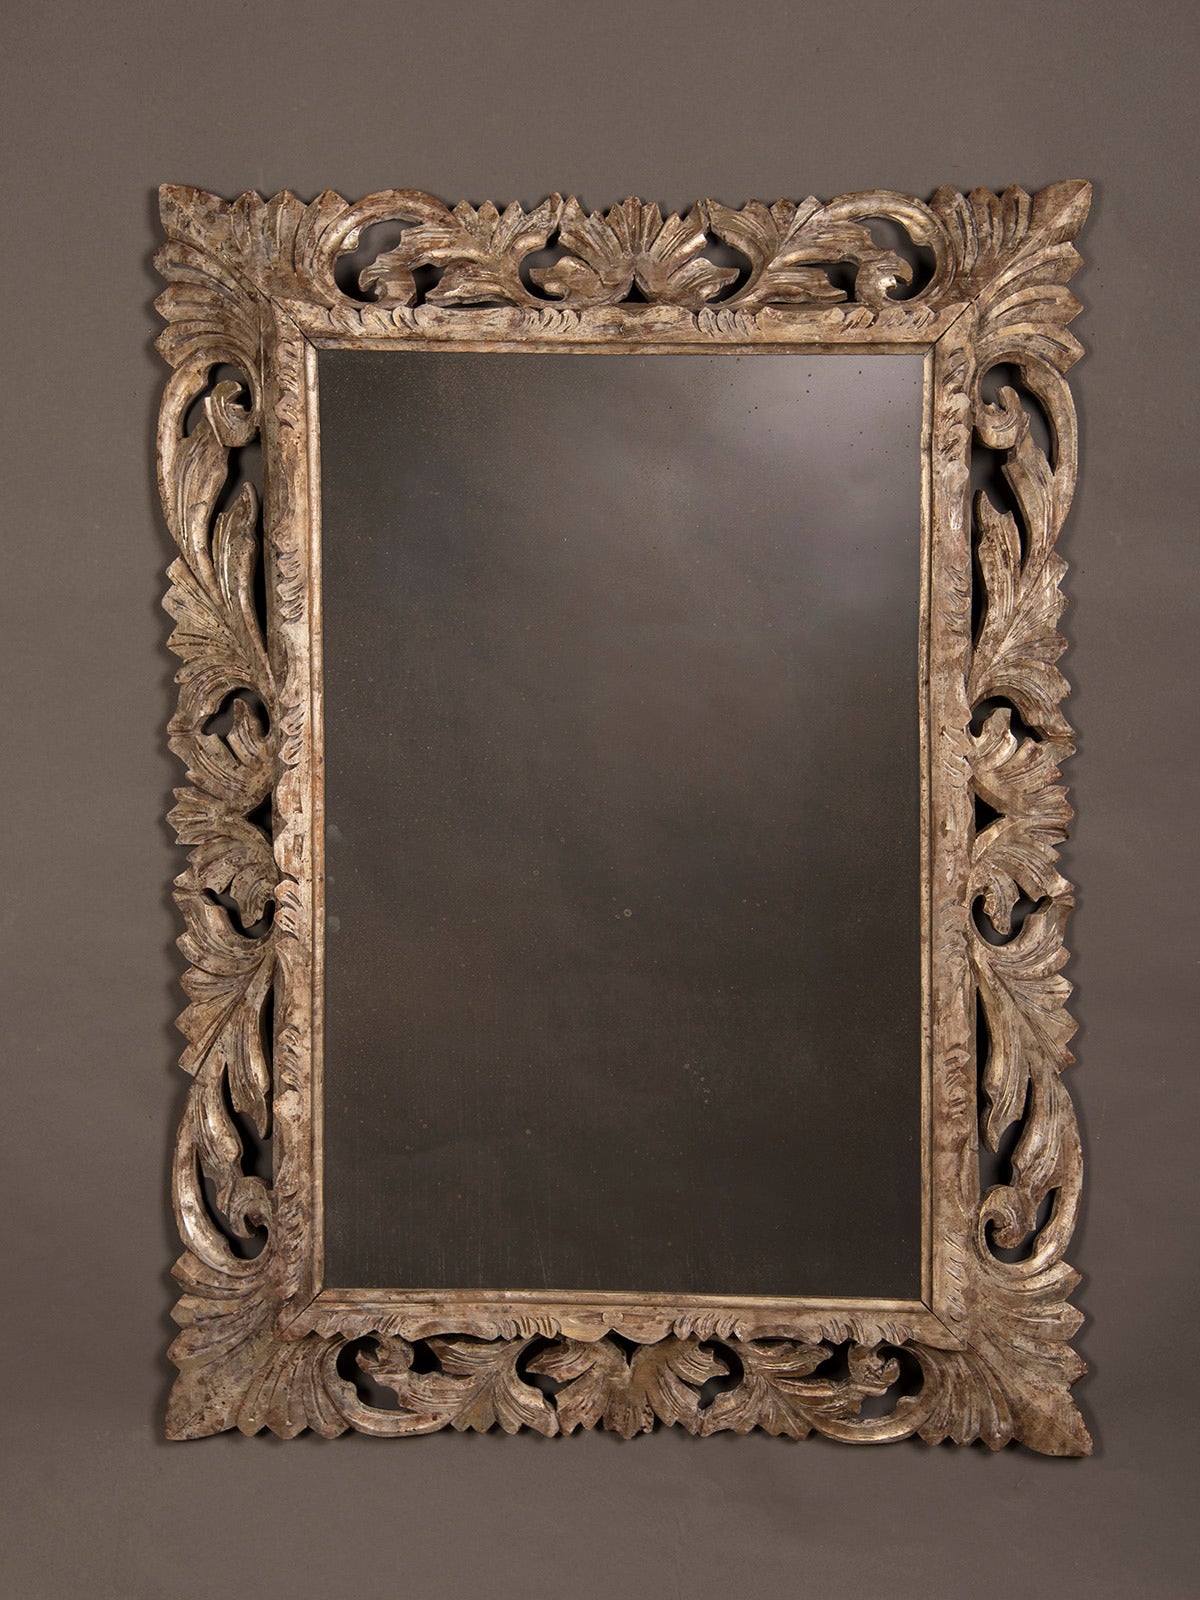 Silvered Carved Oak Mirror, France c.1890. This frame is notable for its unusual combination of carving that accentuates the pierced effect of the open areas between the carved elements. In addition the frame itself is set at an angle to the plane